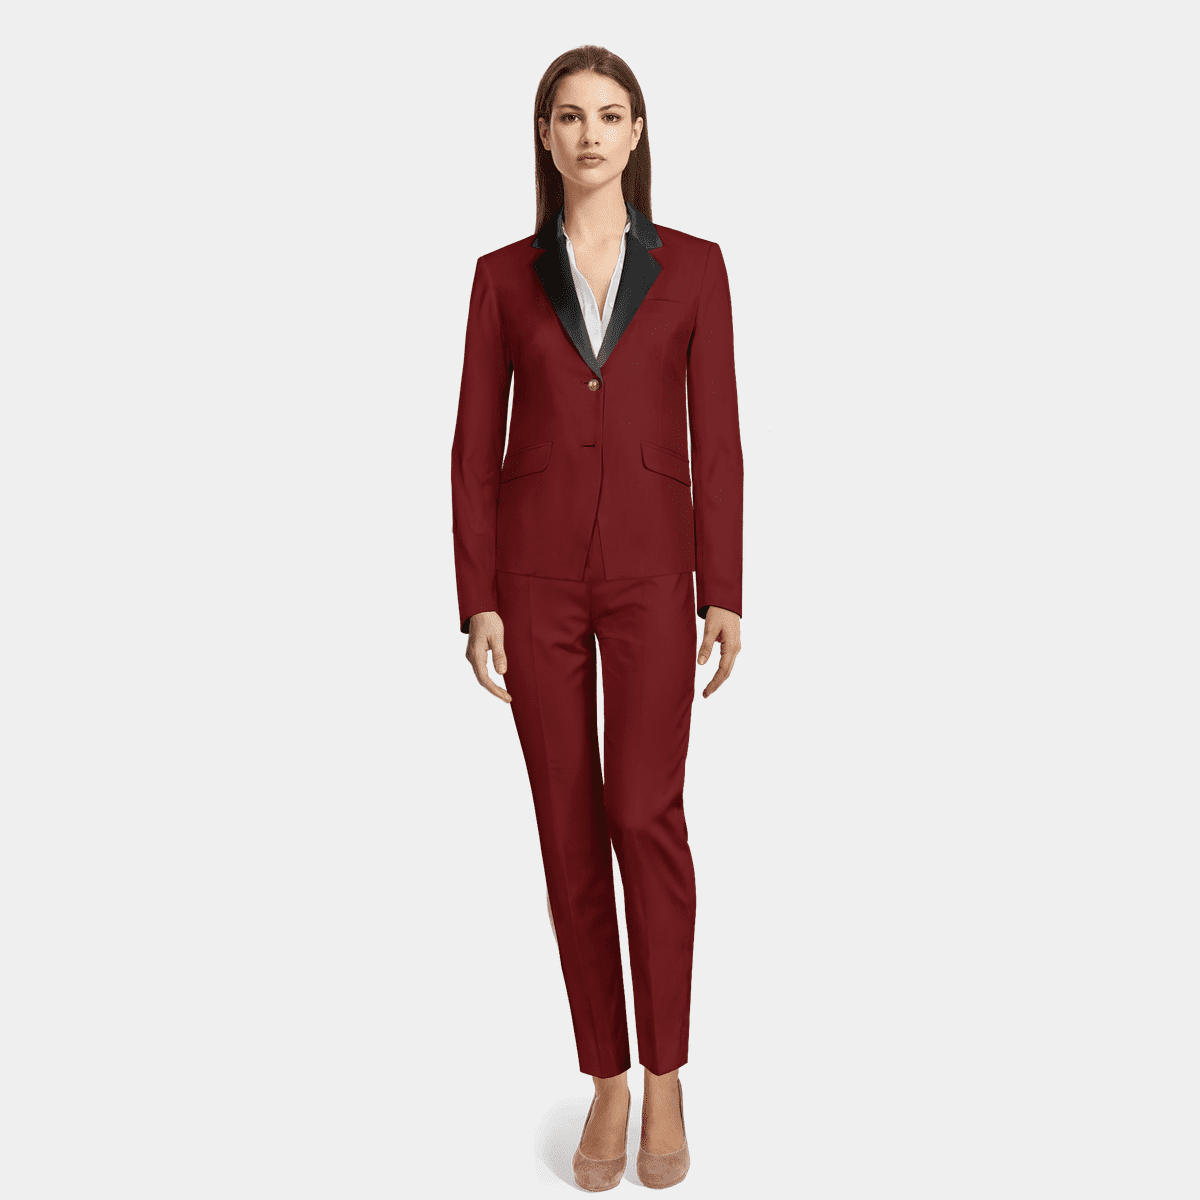 Tuxedo with wide red lapels